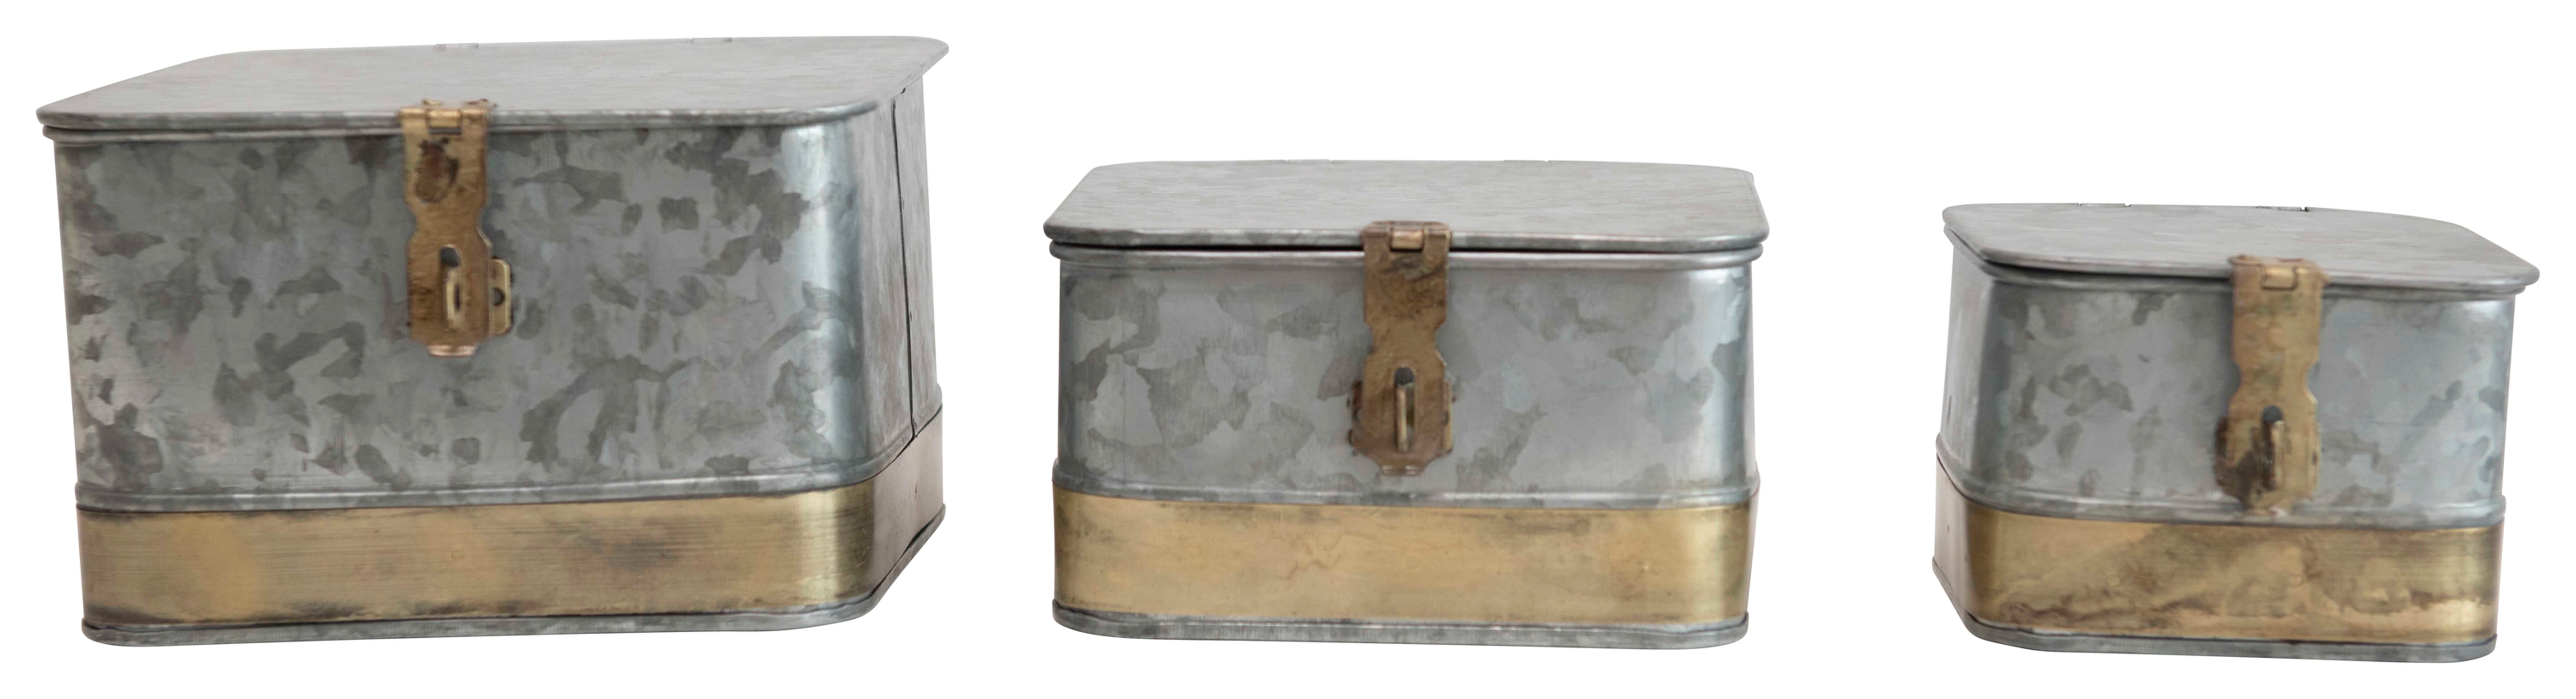 Decorative Galvanized Metal Boxes with Lids & Brass Accents (Set of 3 Sizes) - Nomad Home